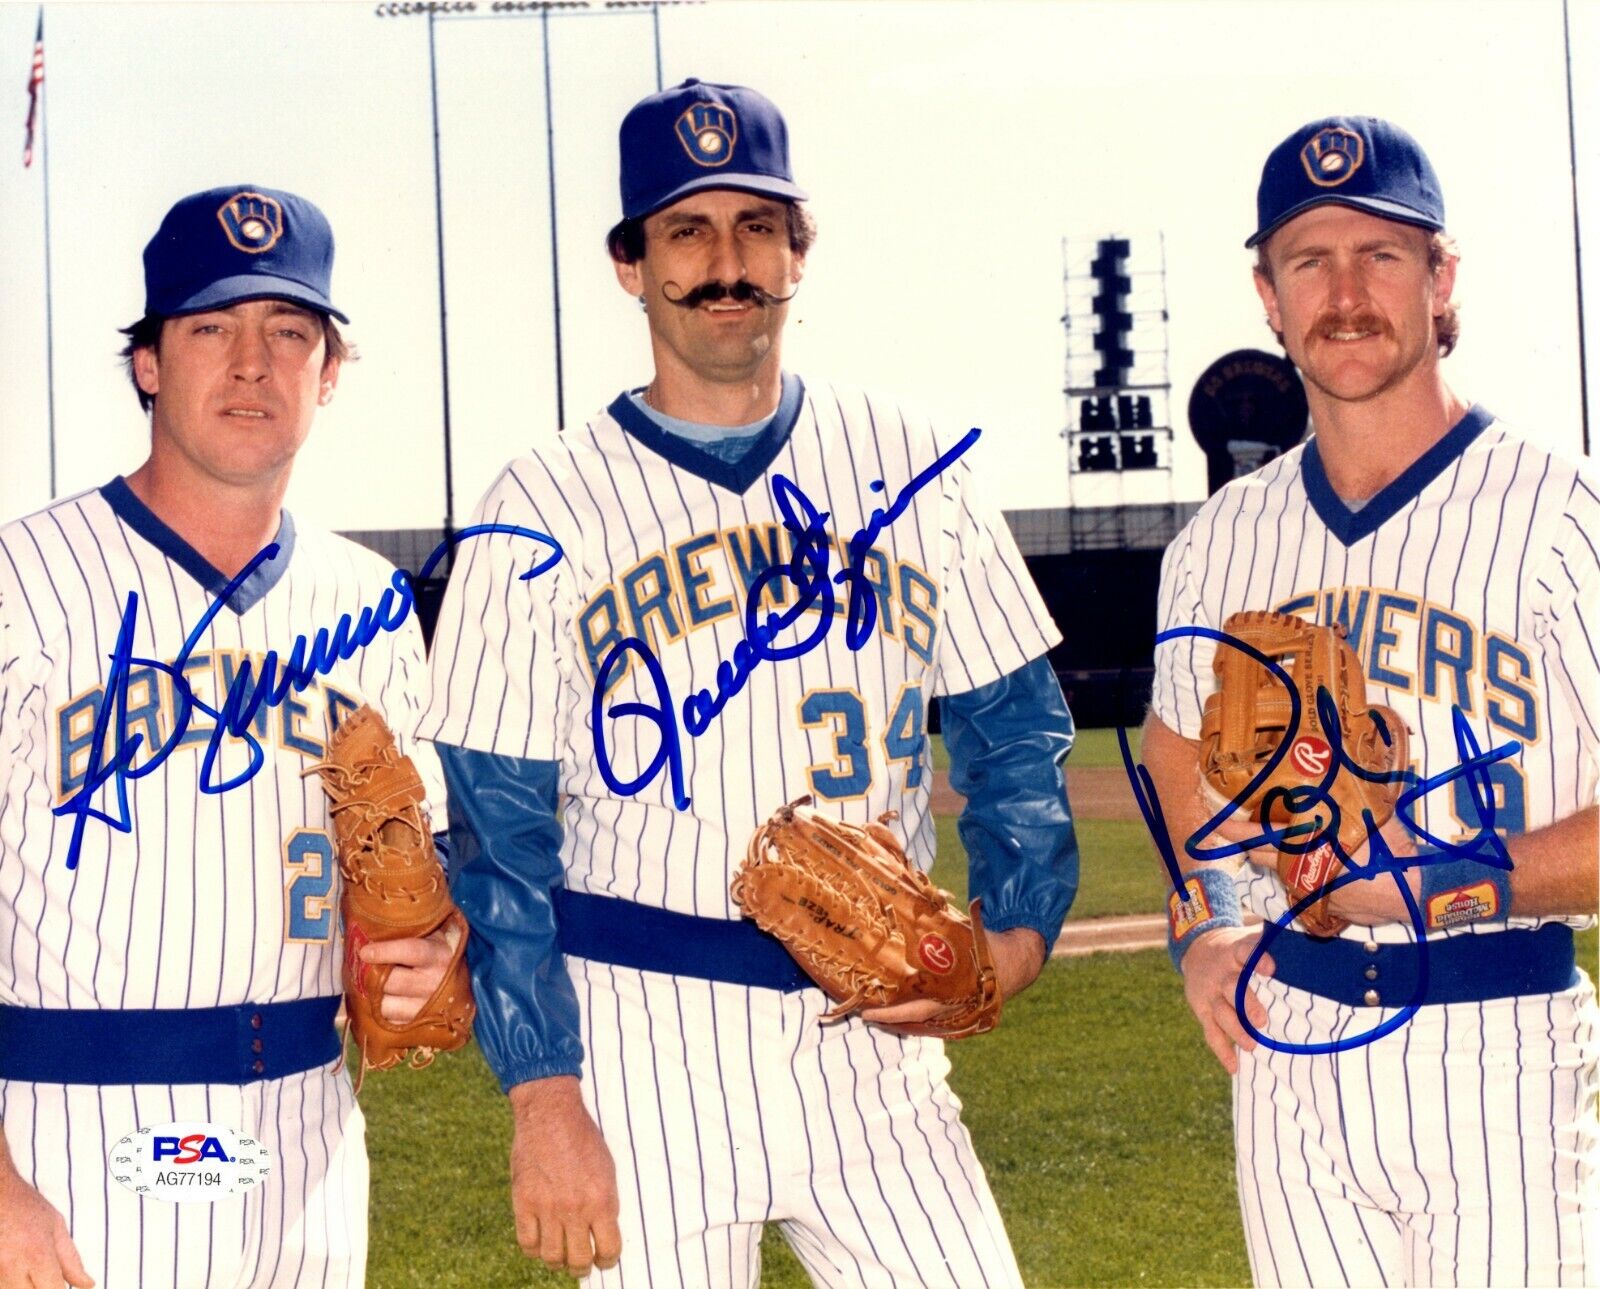 T. Simmons R. Fingers R. Yount autograph signed 8x10 Photo Poster painting Milwaukee Brewers PSA